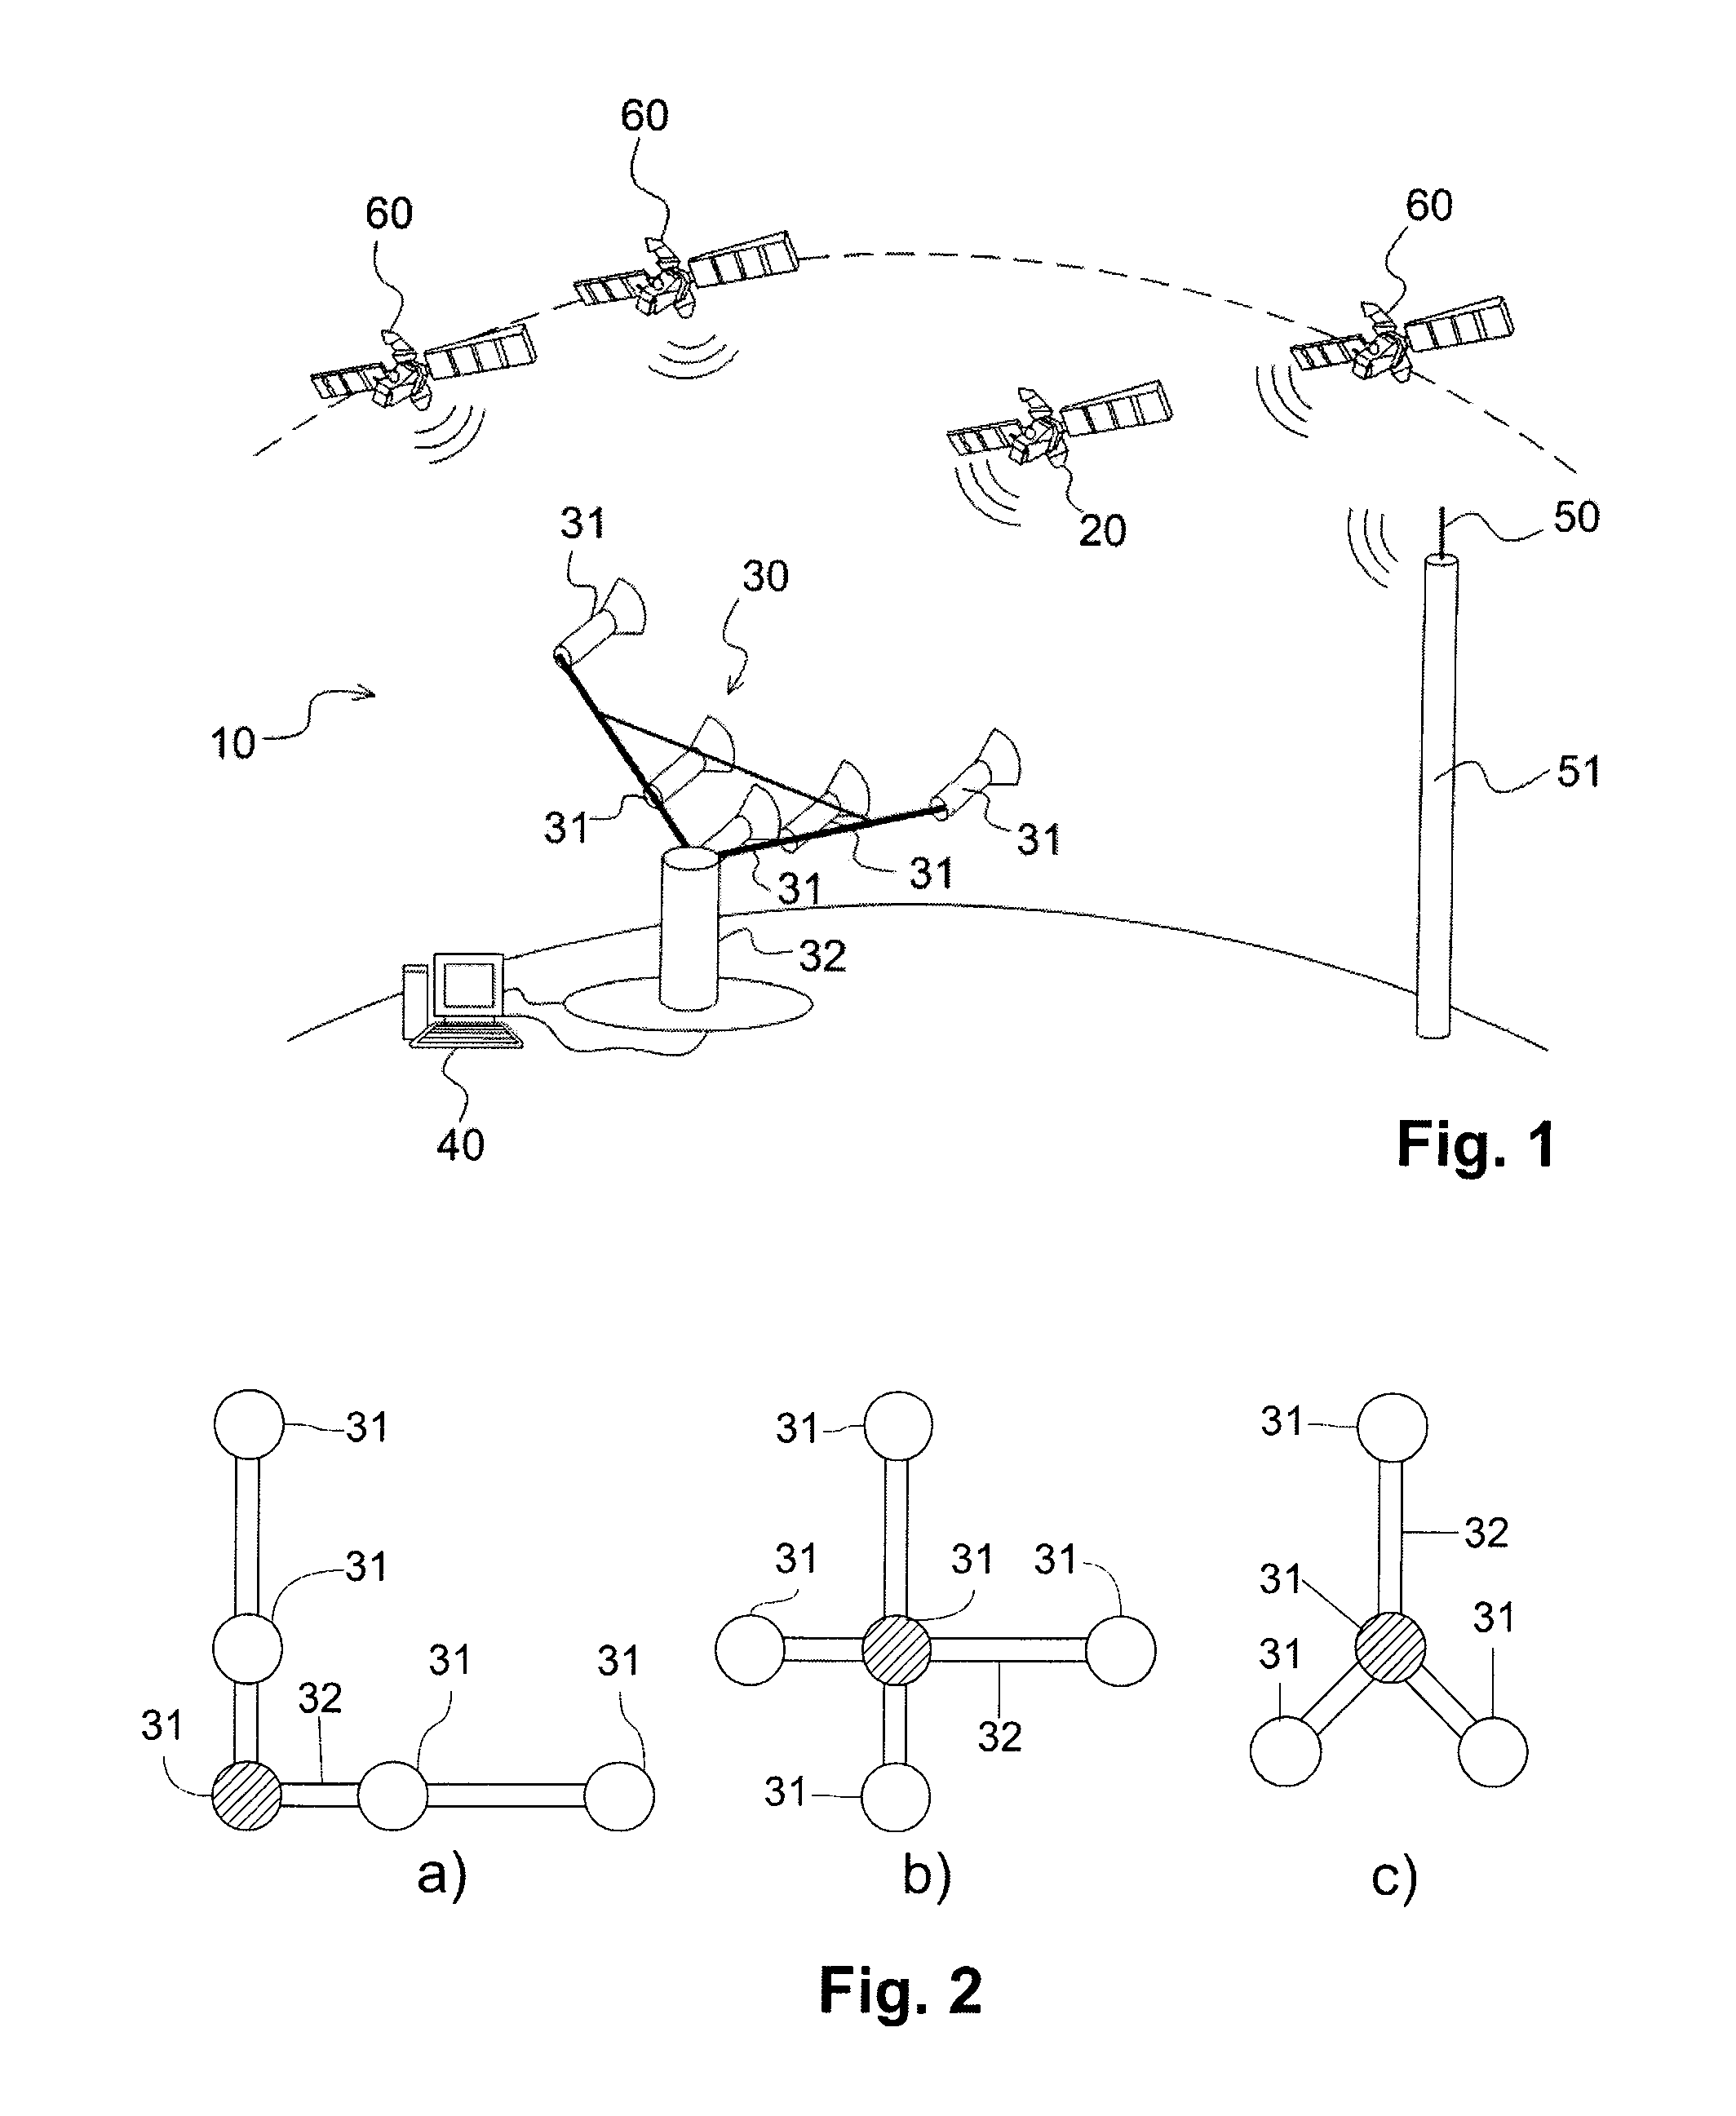 Method and system for monitoring a phase for transferring a satellite from an intial orbit to a mission orbit